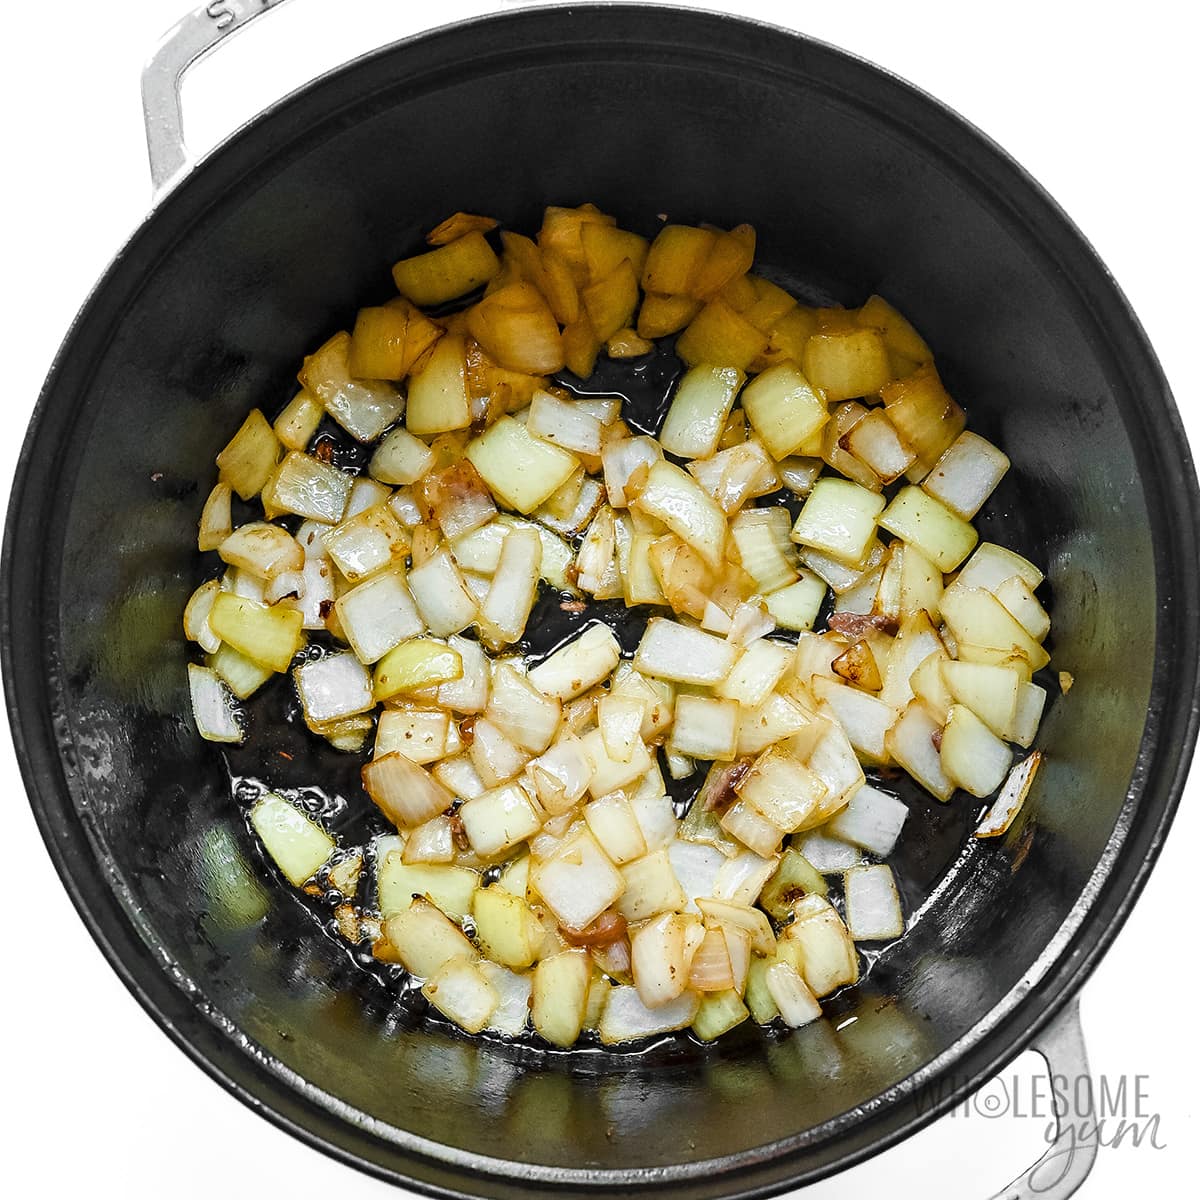 Onions sauteed in Dutch oven.